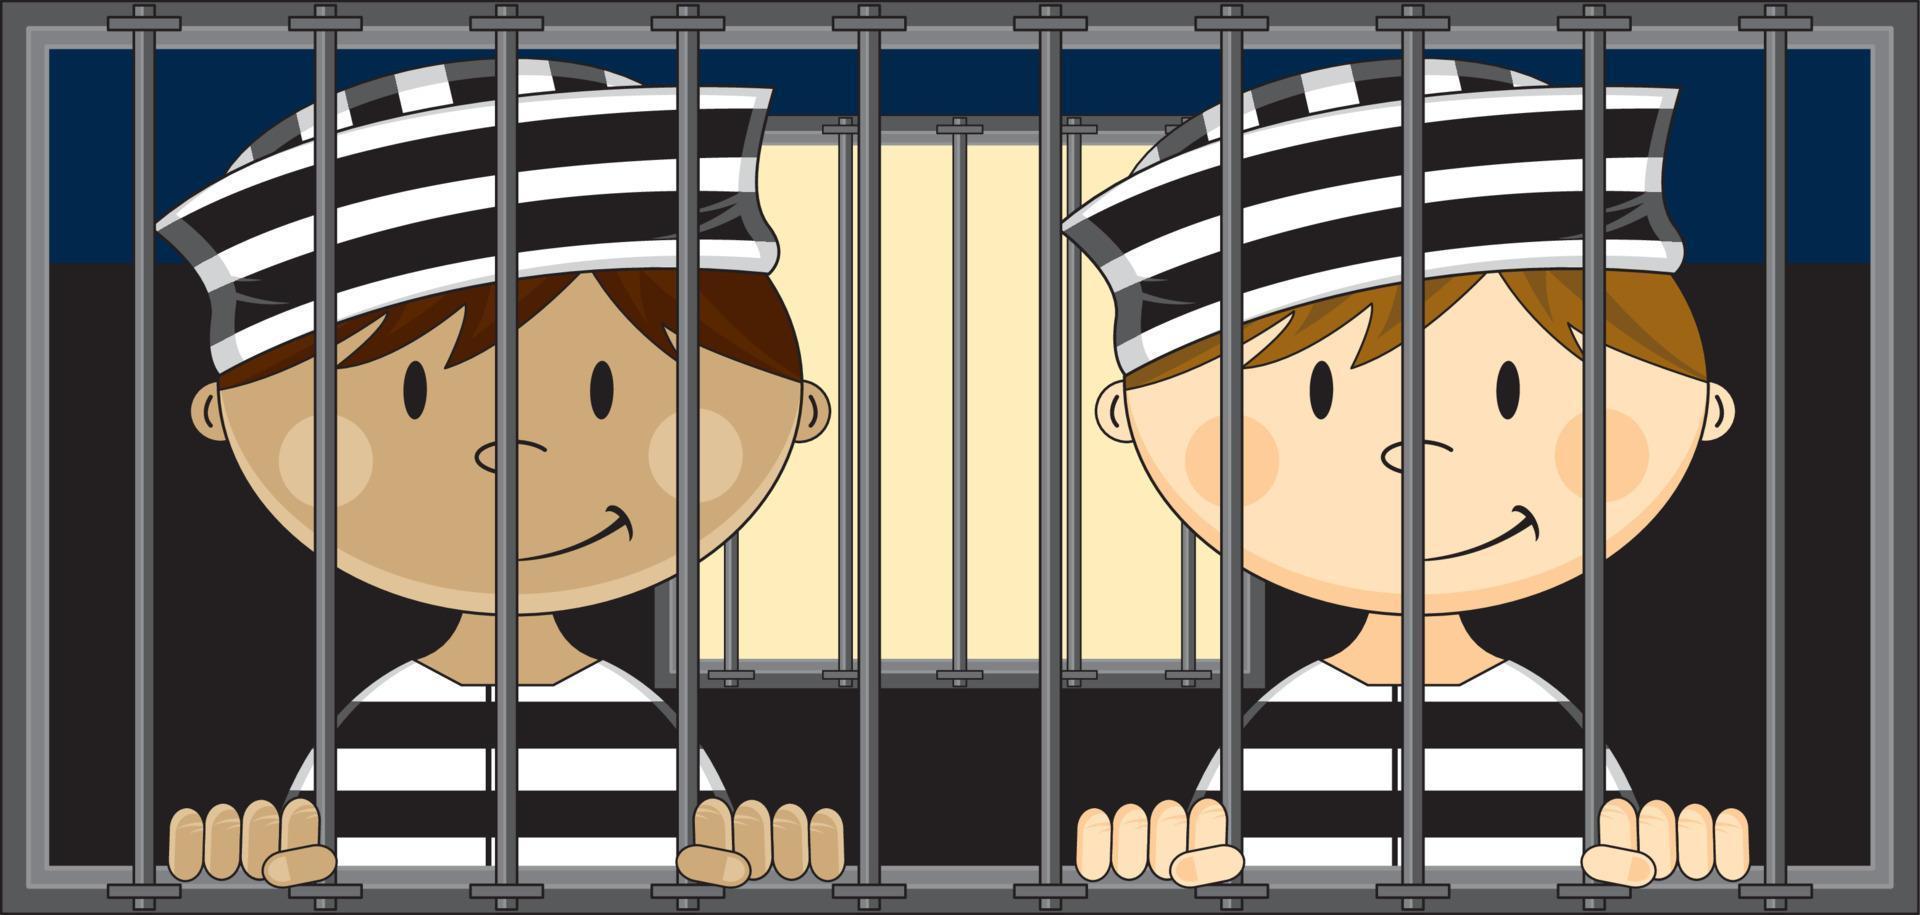 Cartoon Prisoners Wearing Classic Striped Prison Uniform in Jail Cell vector